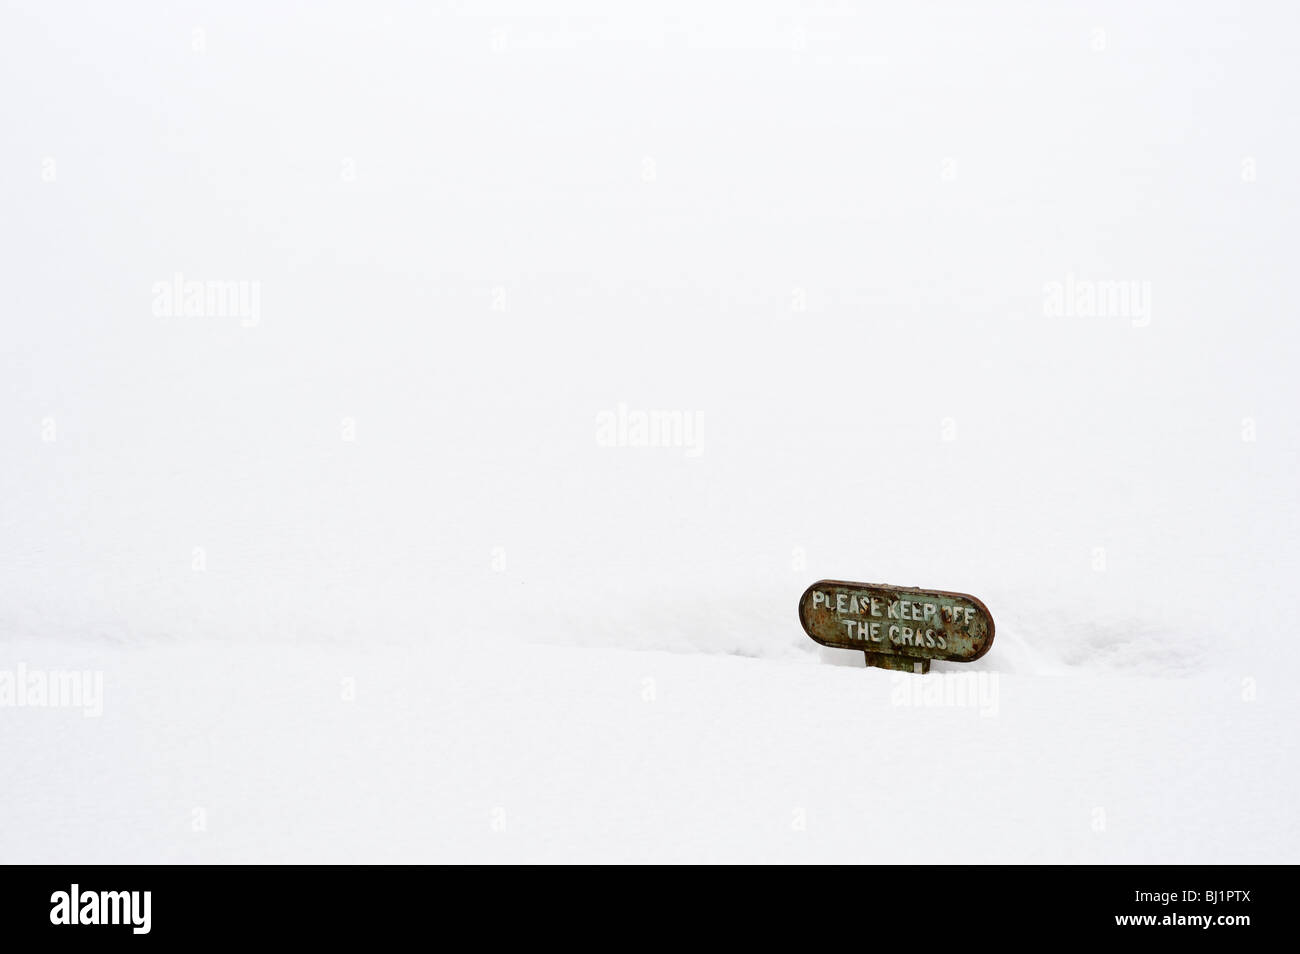 Snow covered lawn, with 'Keep of grass' warning board Stock Photo